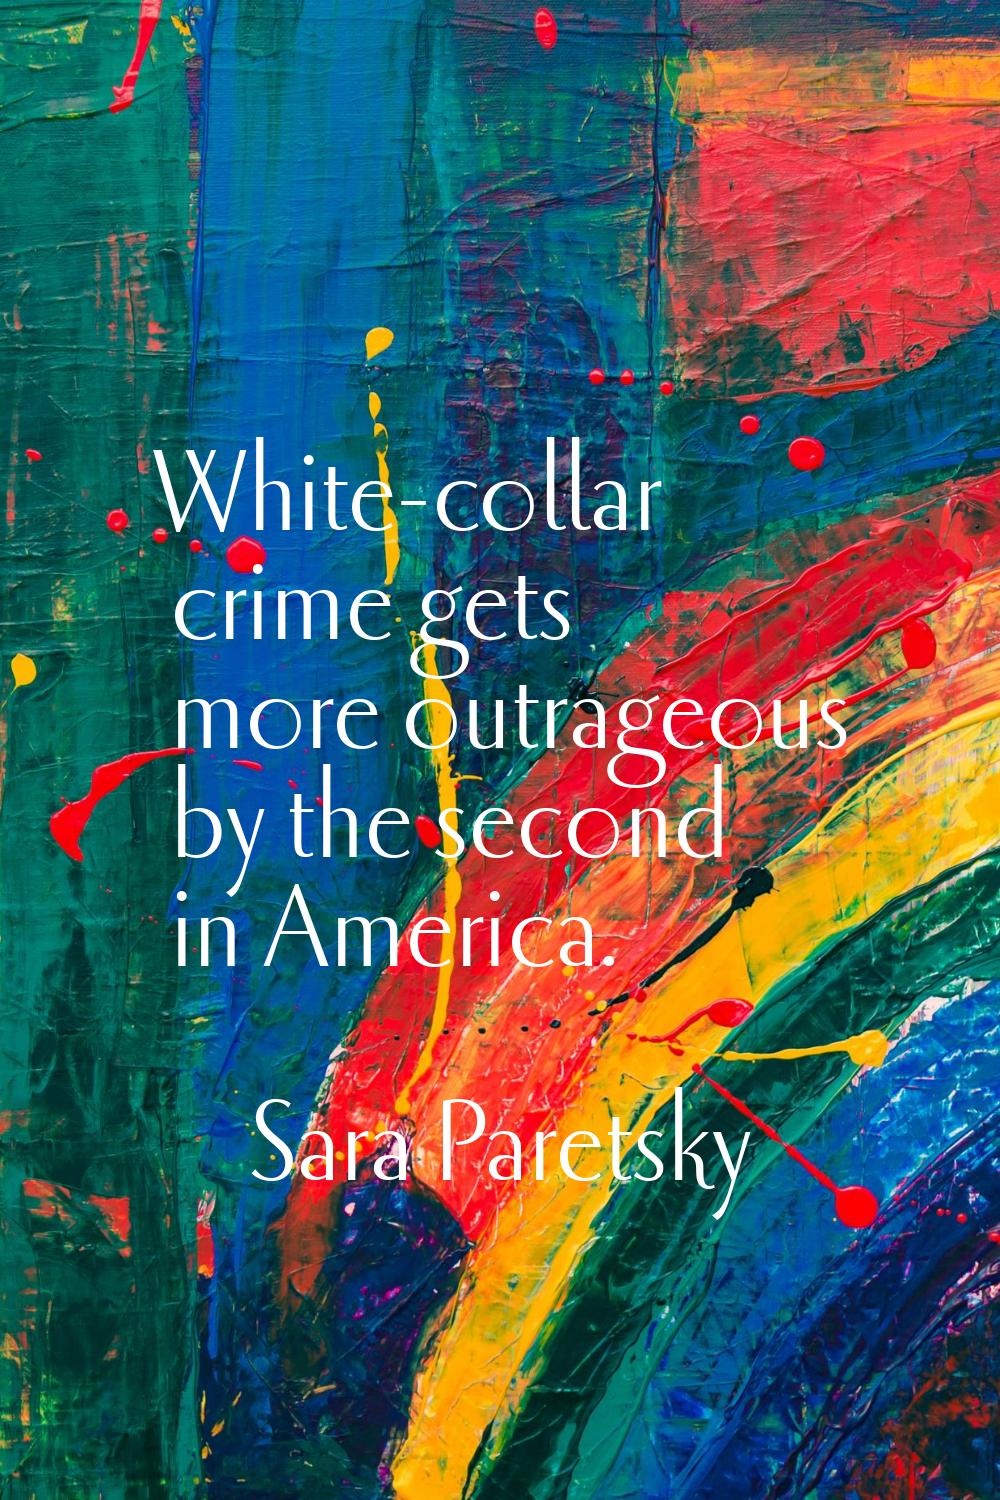 White-collar crime gets more outrageous by the second in America.